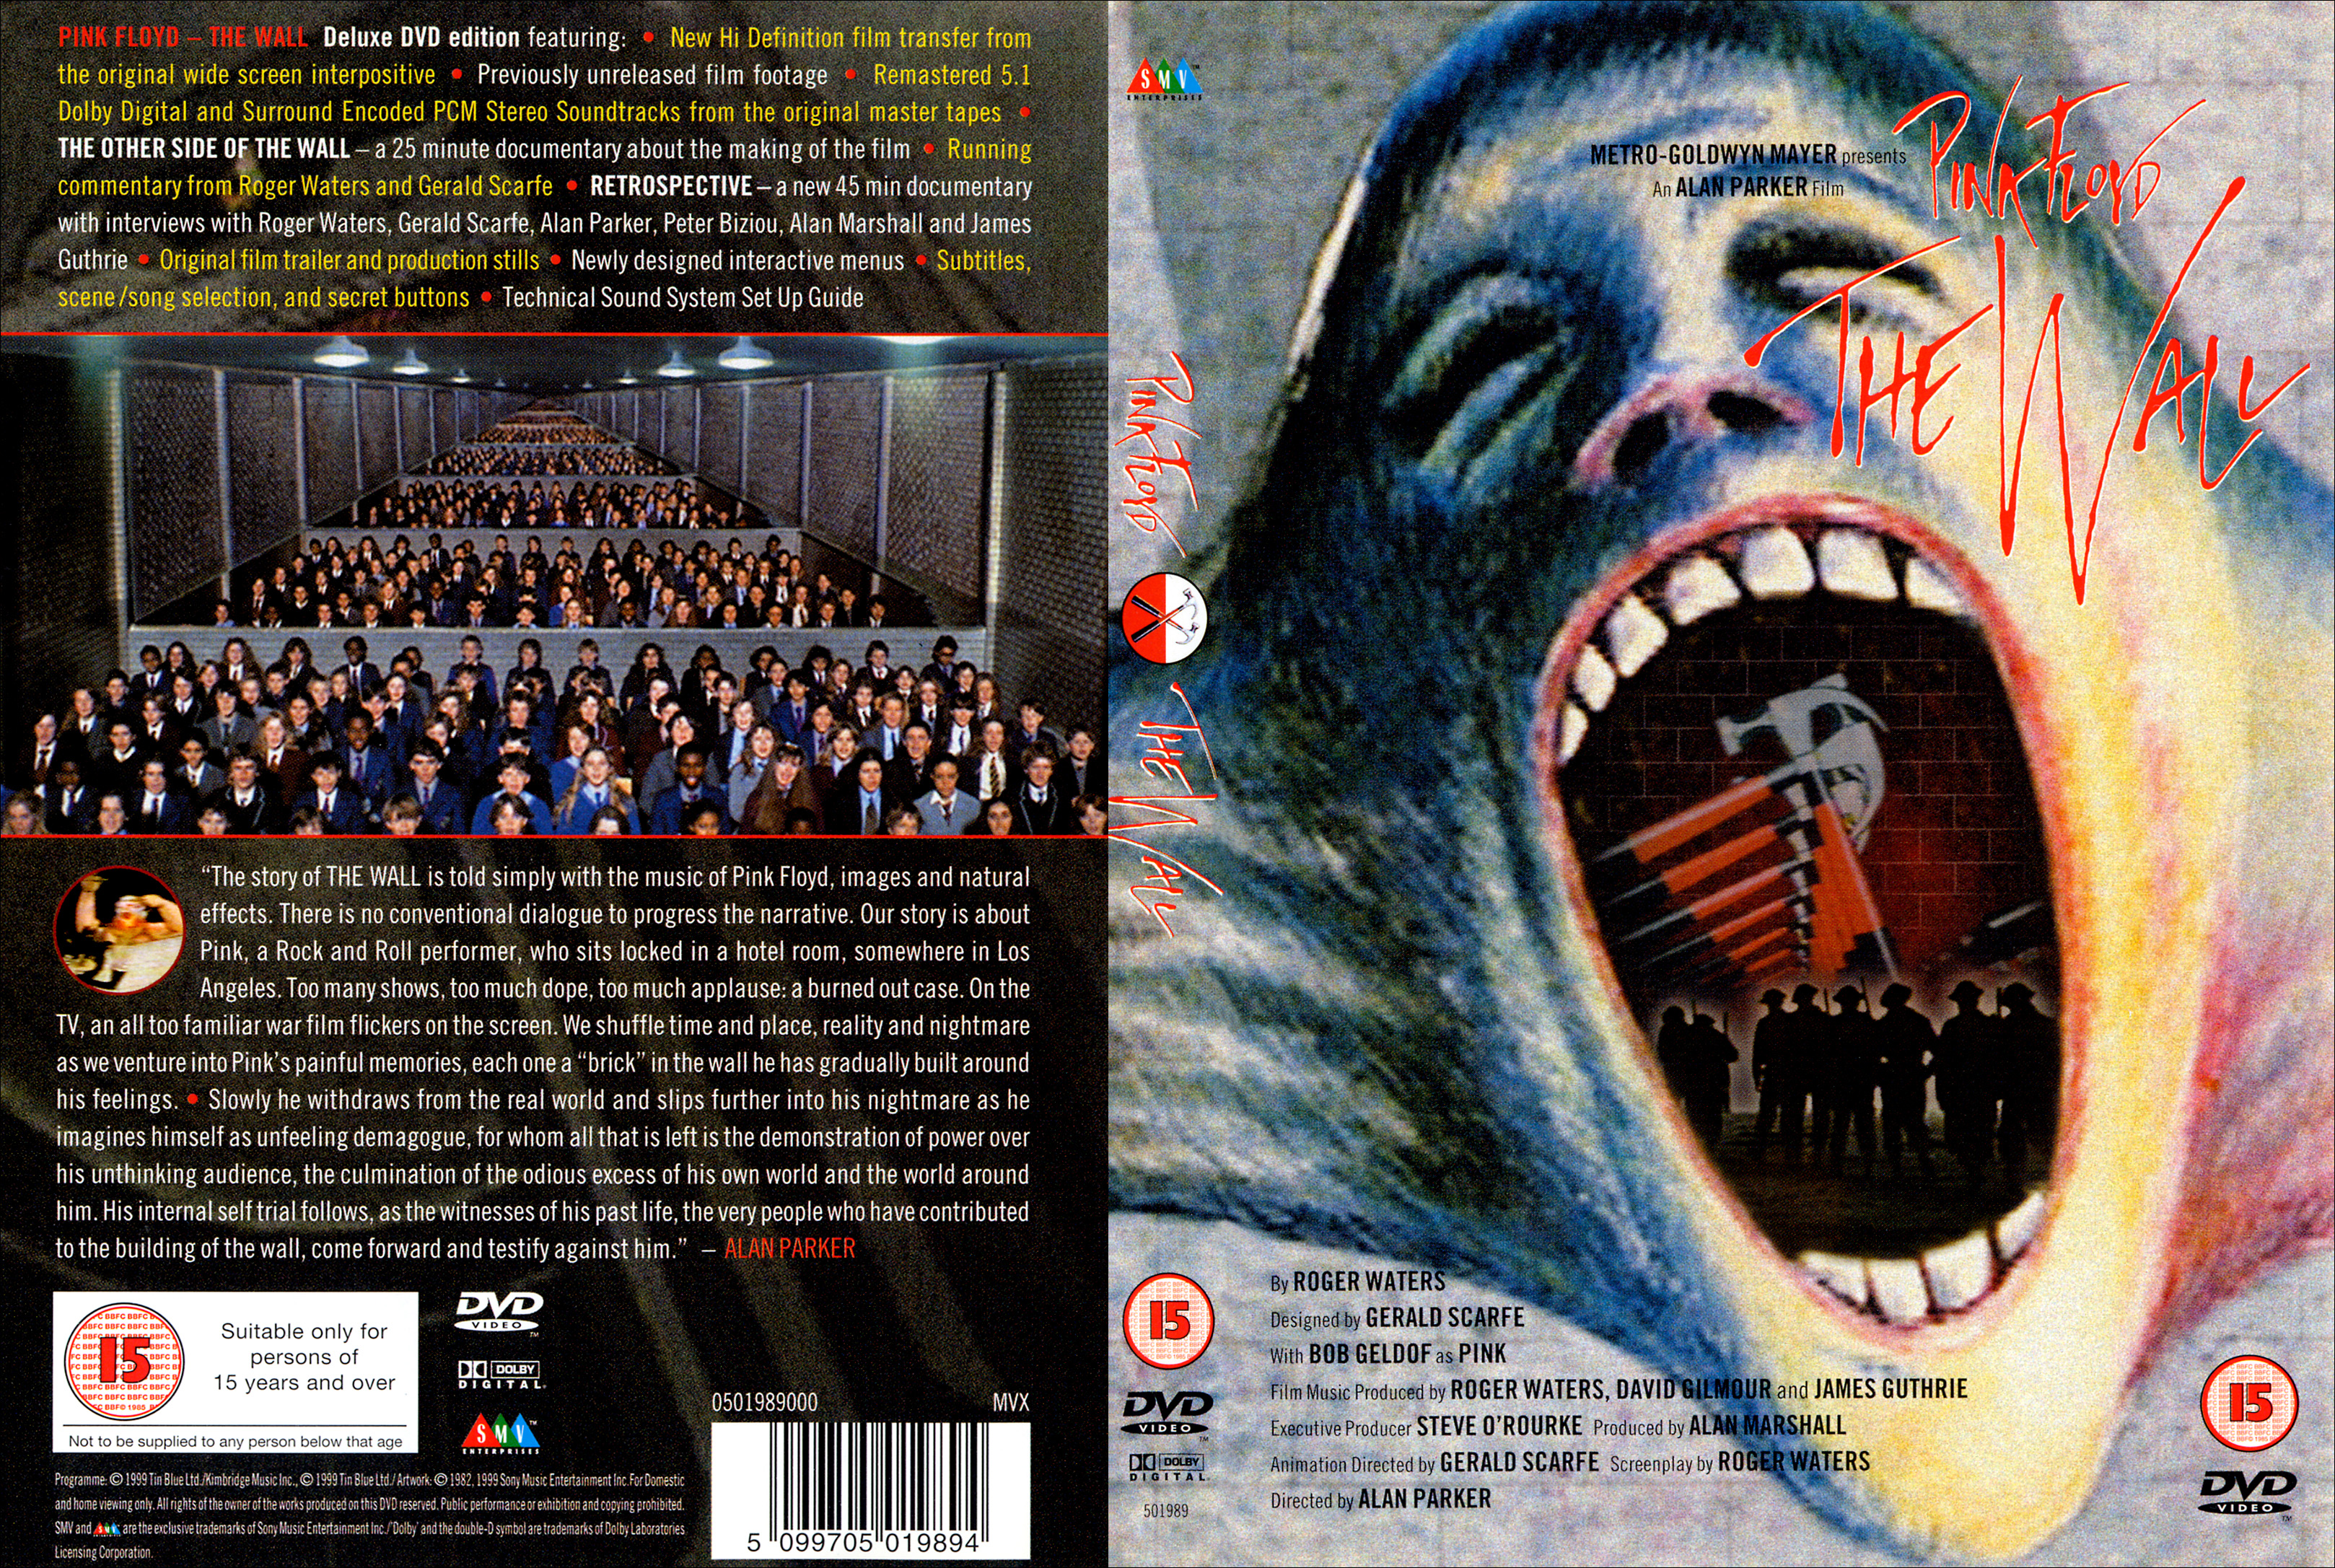 Jaquette DVD Pink Floyd the wall